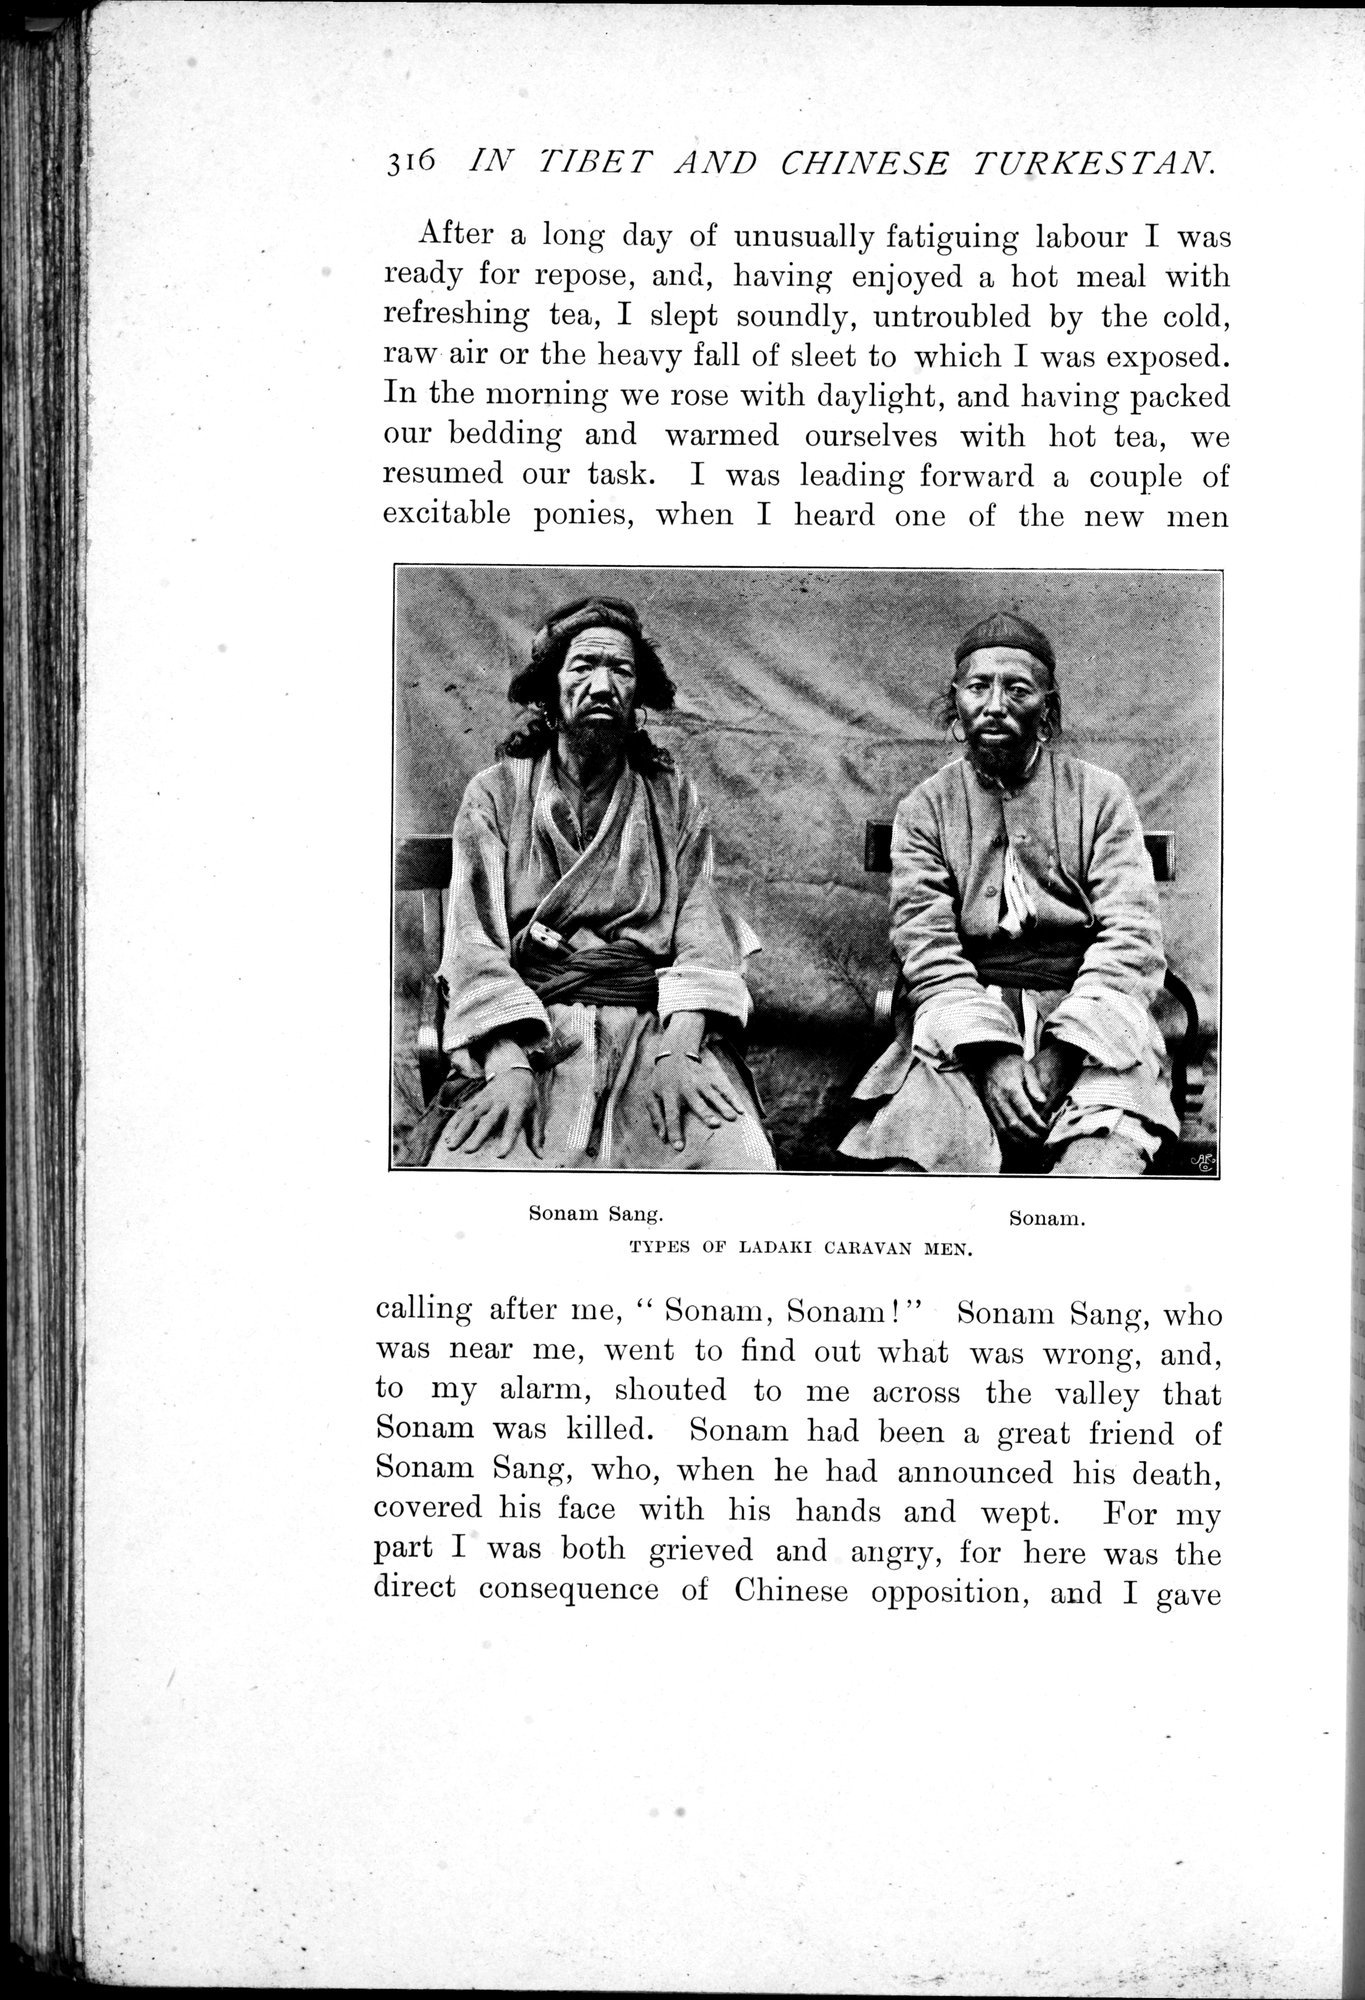 In Tibet and Chinese Turkestan : vol.1 / Page 356 (Grayscale High Resolution Image)